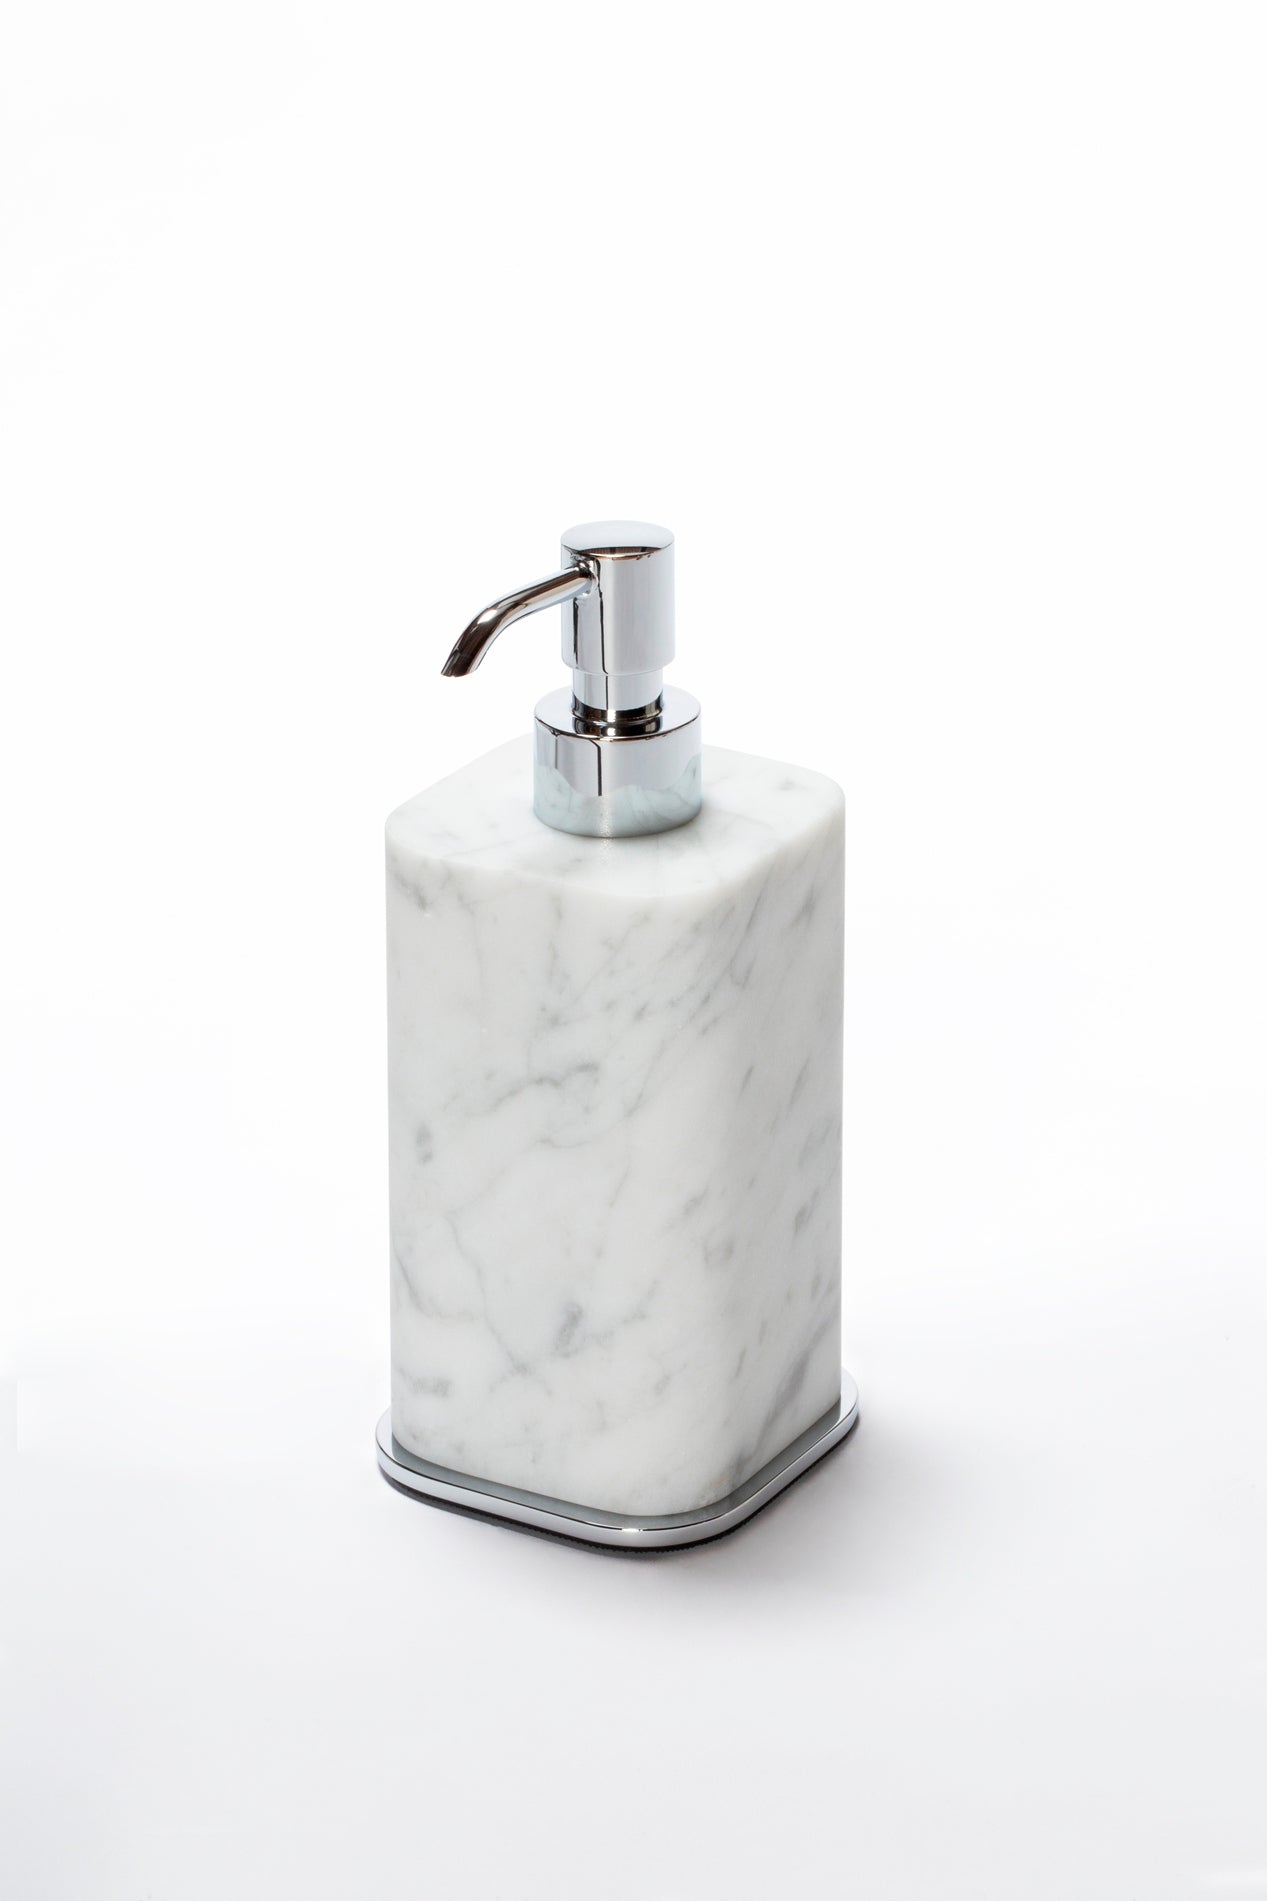 Giobagnara Polo Marble Soap Dispenser | Marble Structure with Brass Base Frame | Non-Slip Waterproof Rubber Base | Part of Polo Marble Bathroom Set | Iconic Silhouette with Rounded Corners | Unique and Exclusive Design | Explore the Polo Marble Bathroom Collection at 2Jour Concierge, #1 luxury high-end gift & lifestyle shop